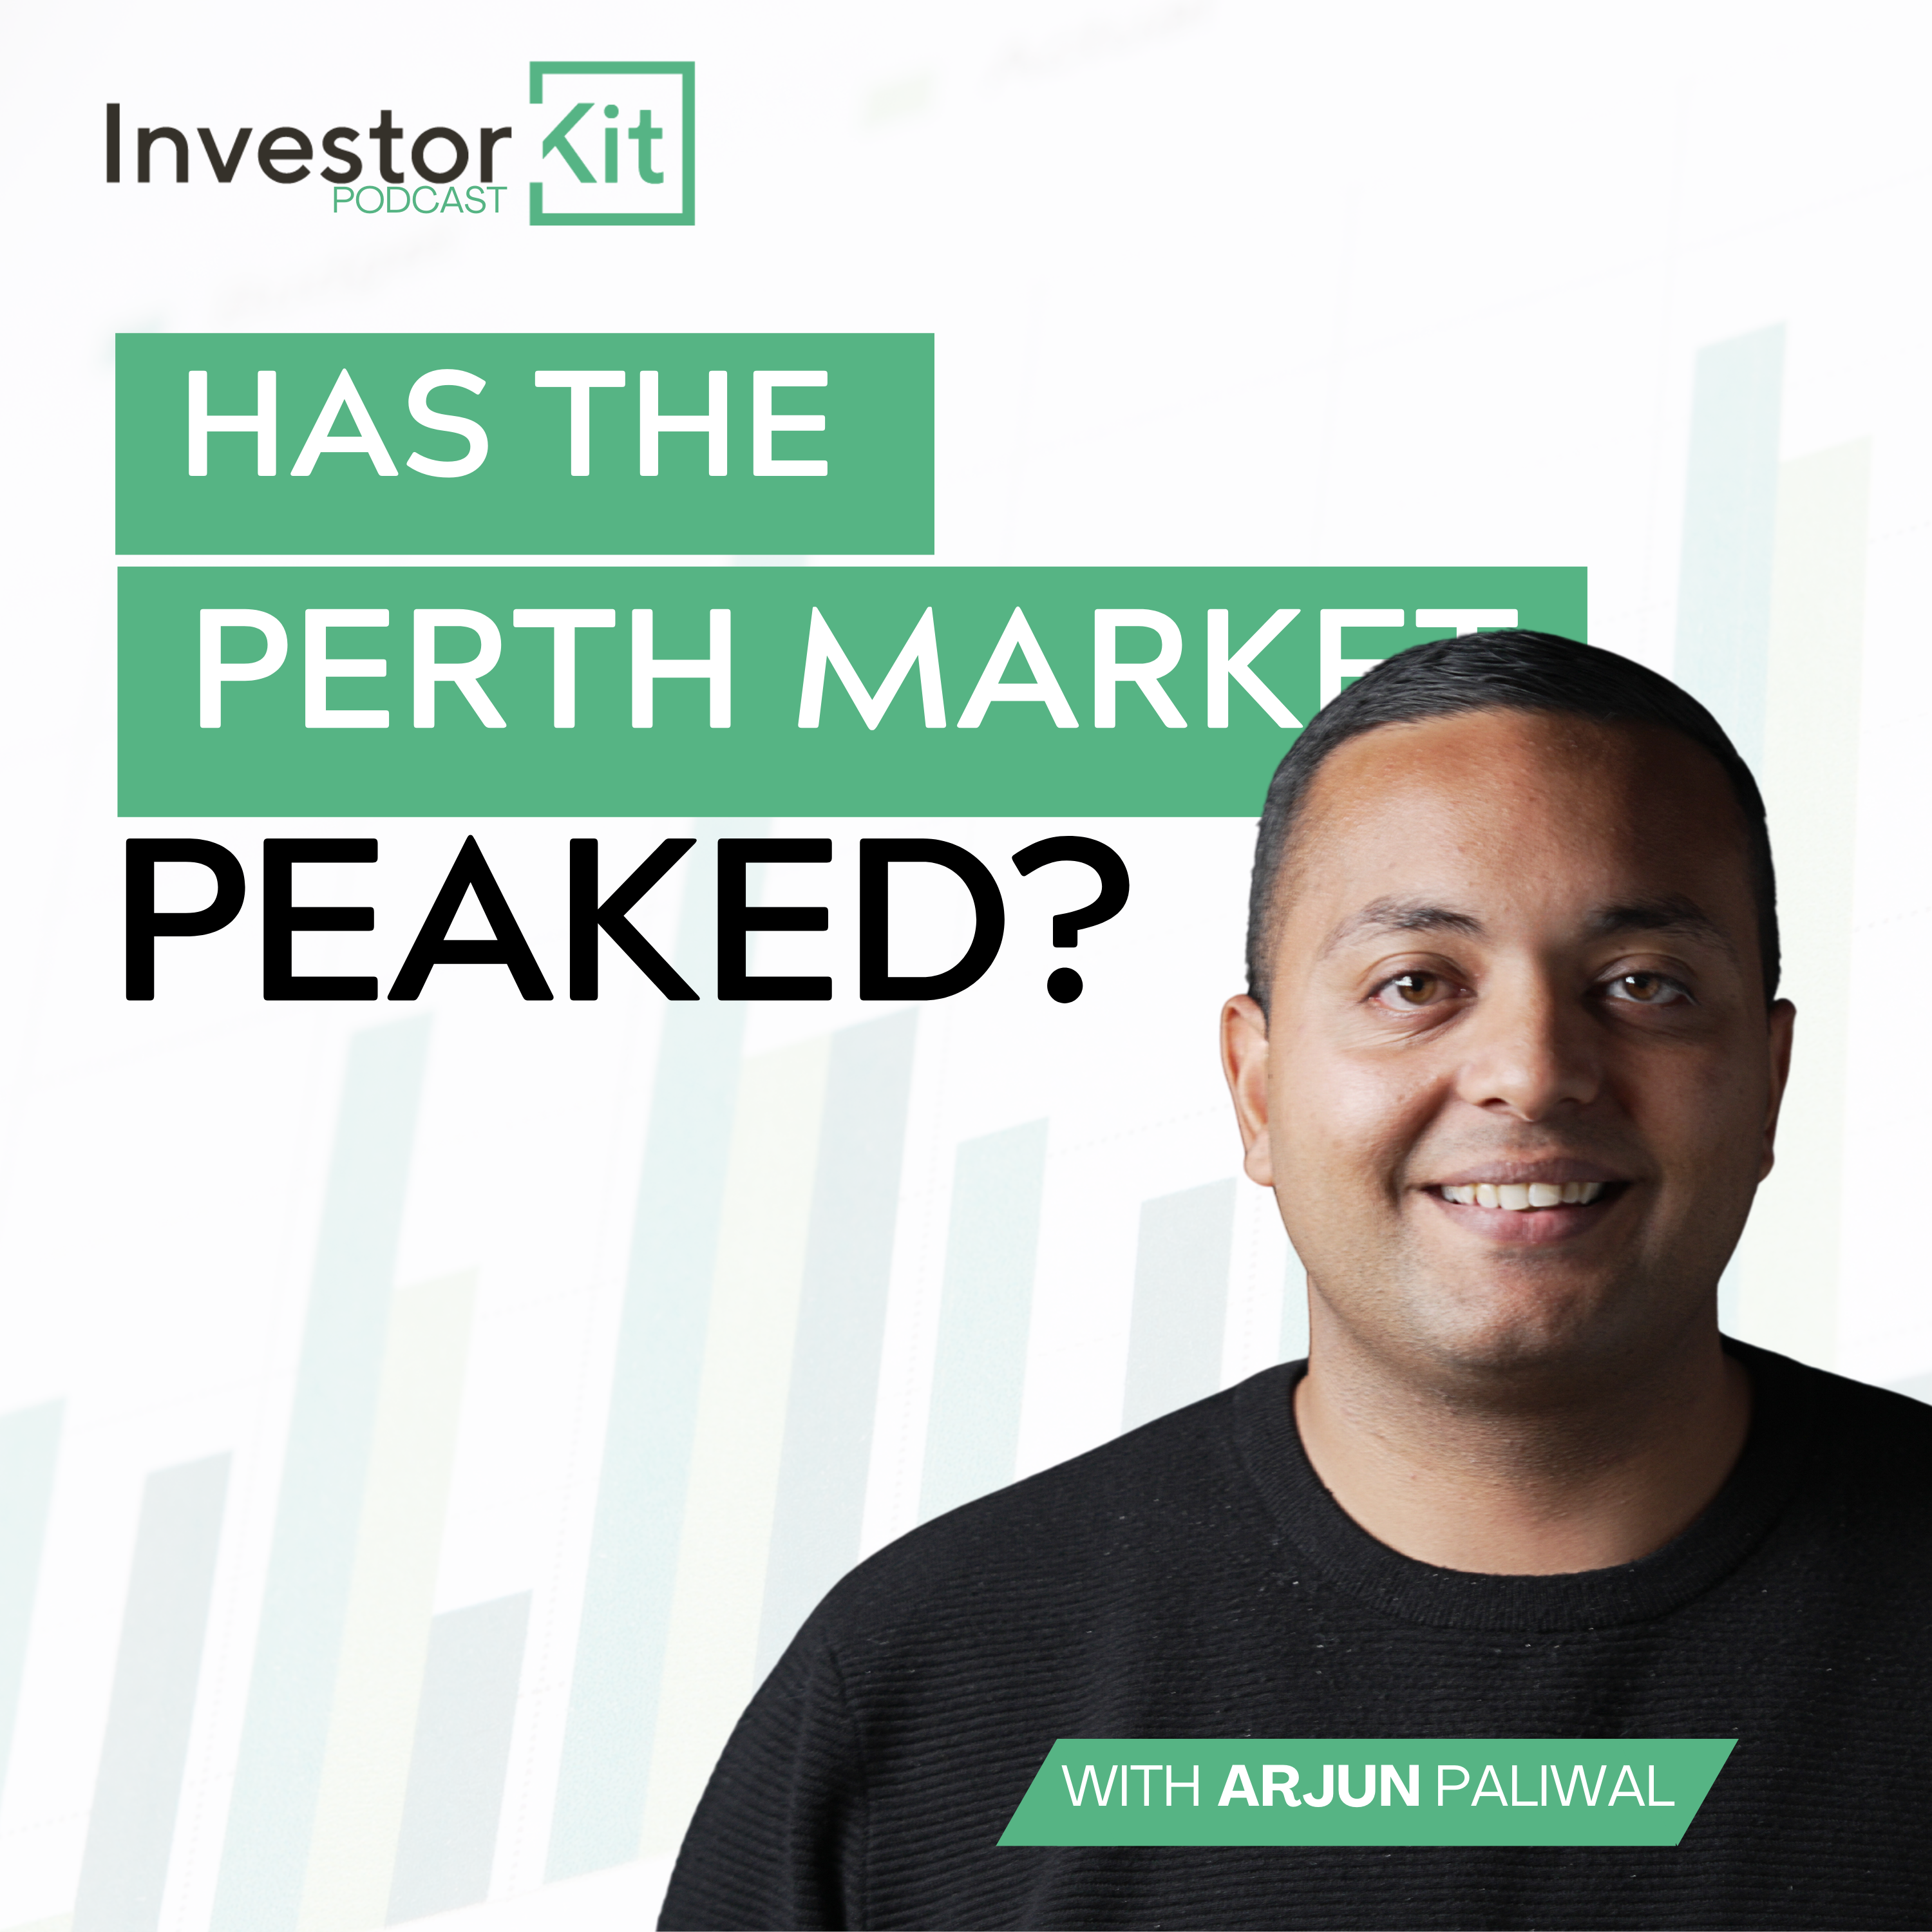 Has Perth Reached It's Peak? Should You Stay Away Or Invest?